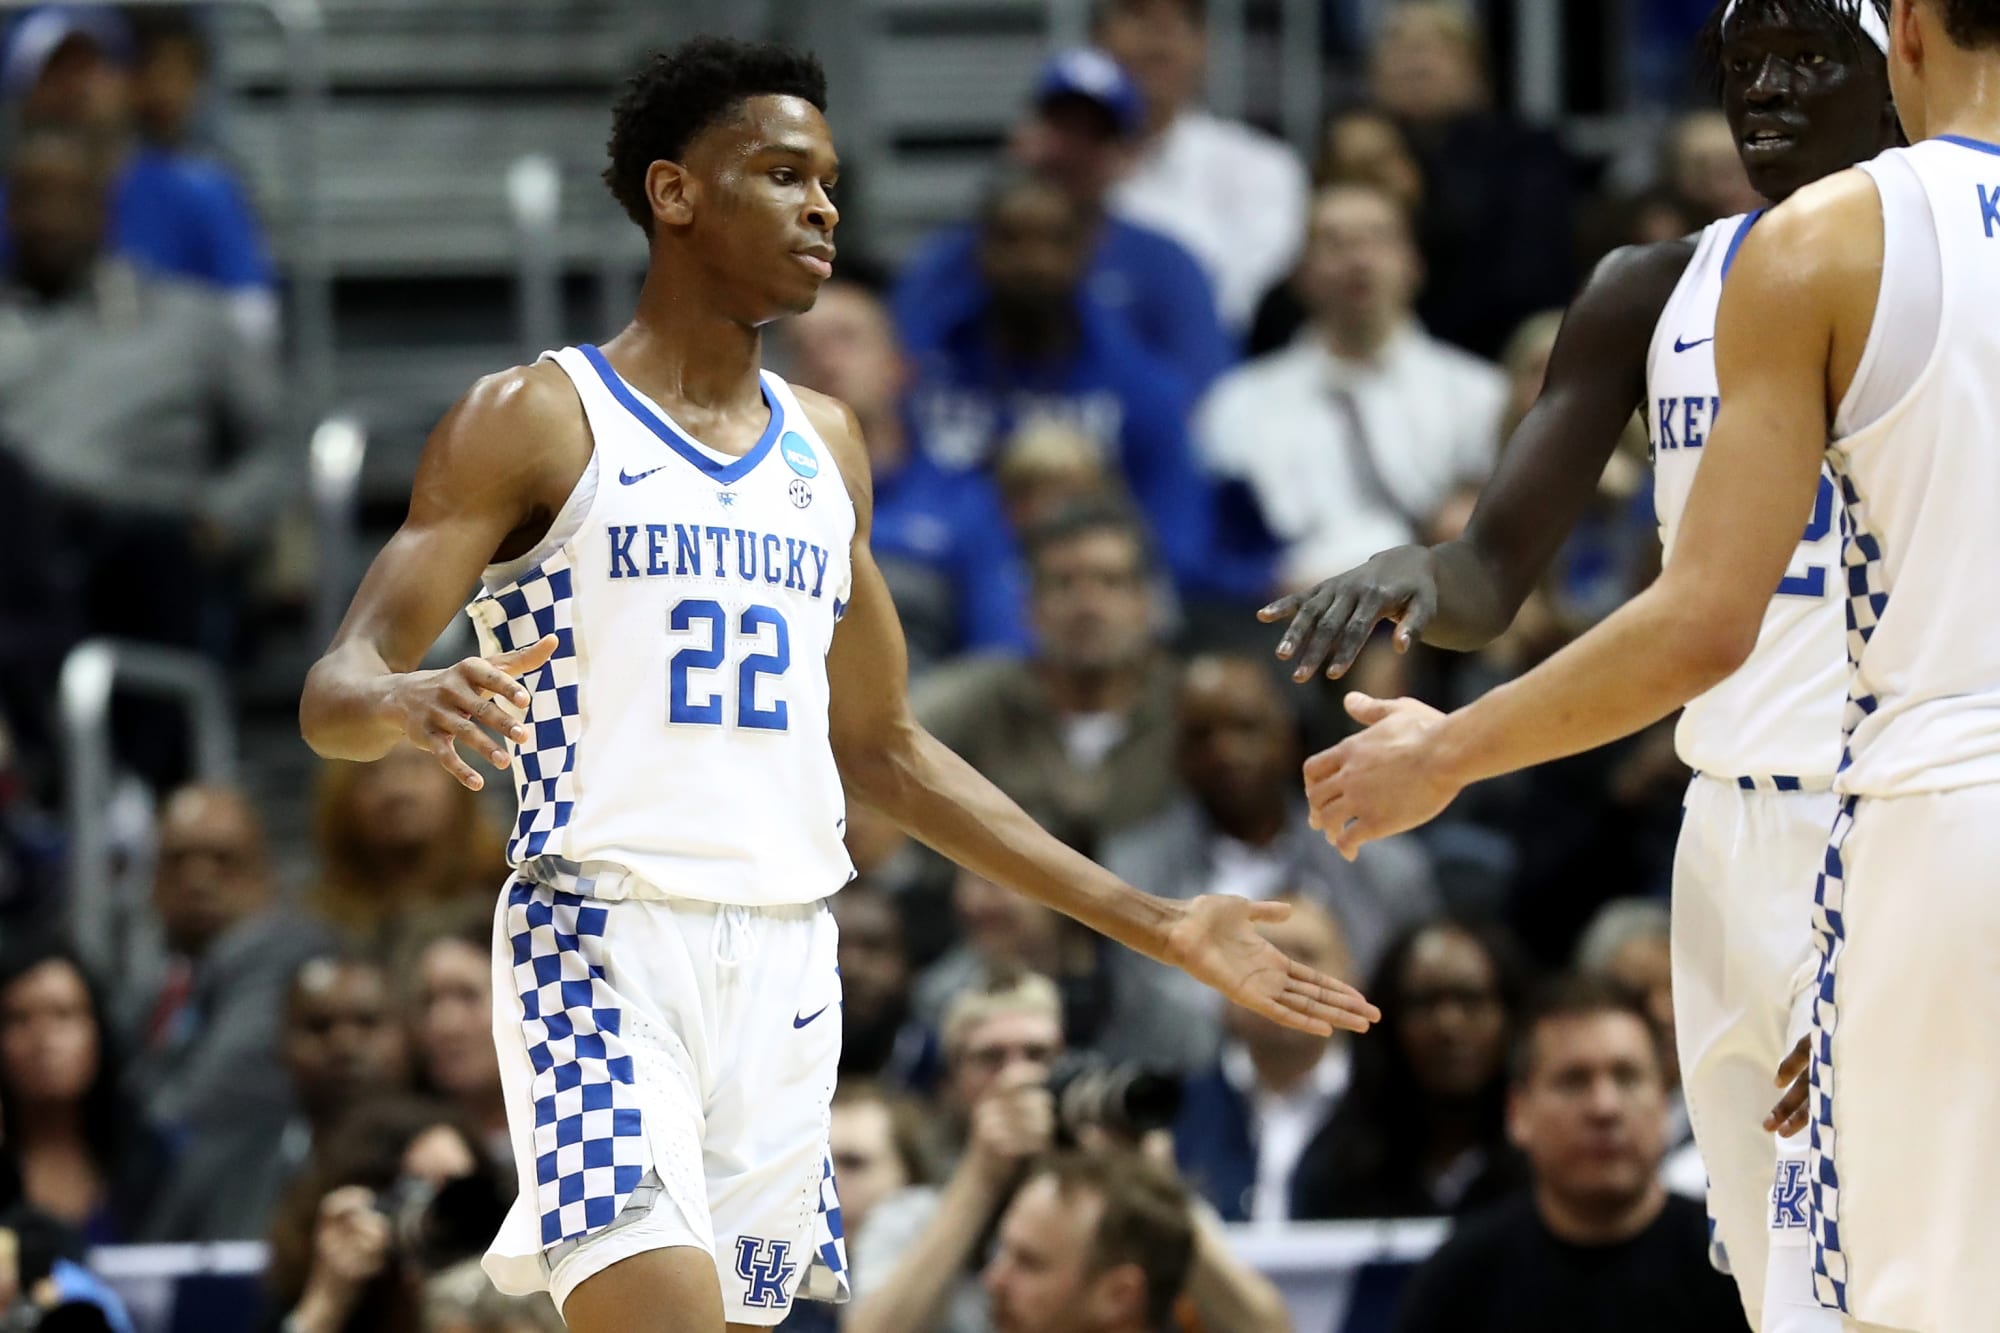 See what UK stars Shai Gilgeous-Alexander, Kevin Knox wore to NBA